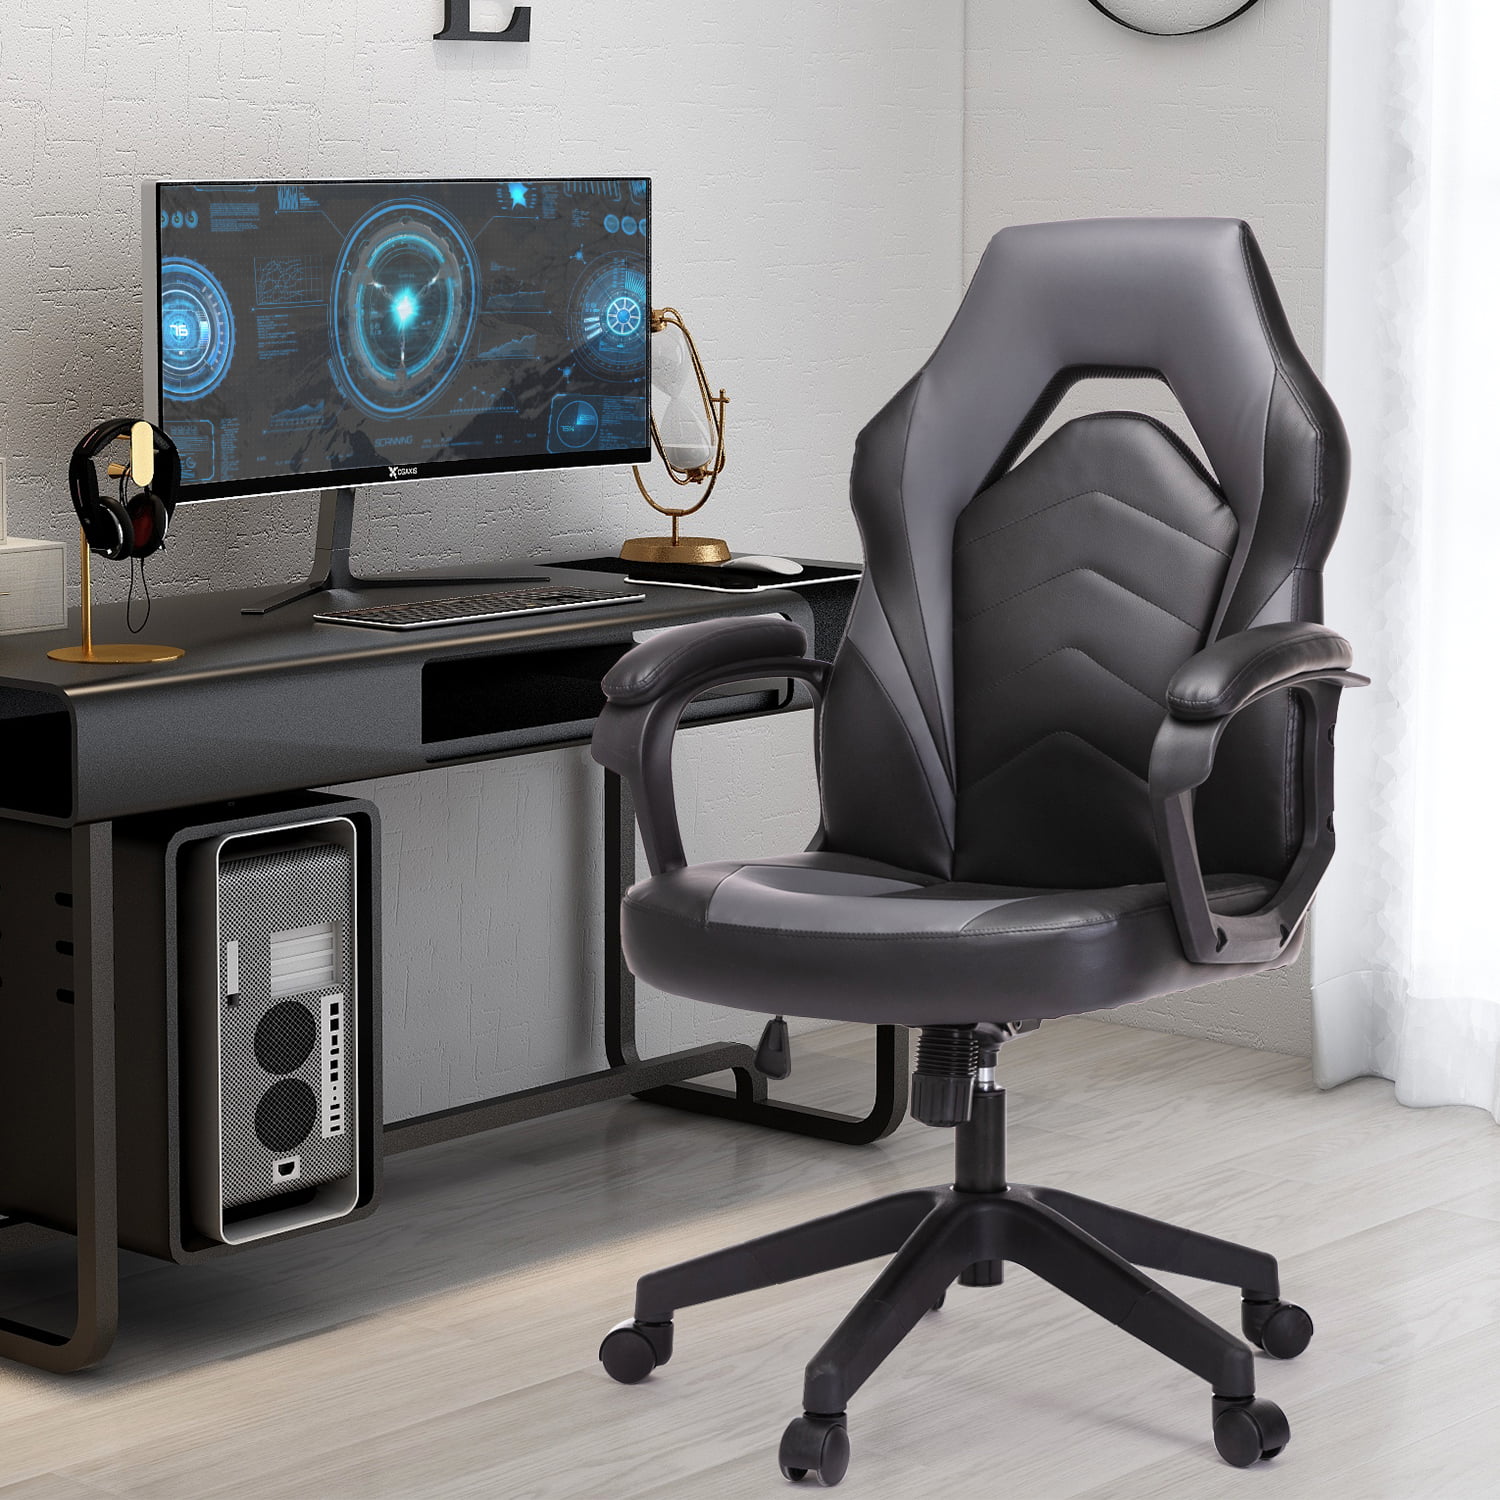 How to choose the right office chair   AJ Products